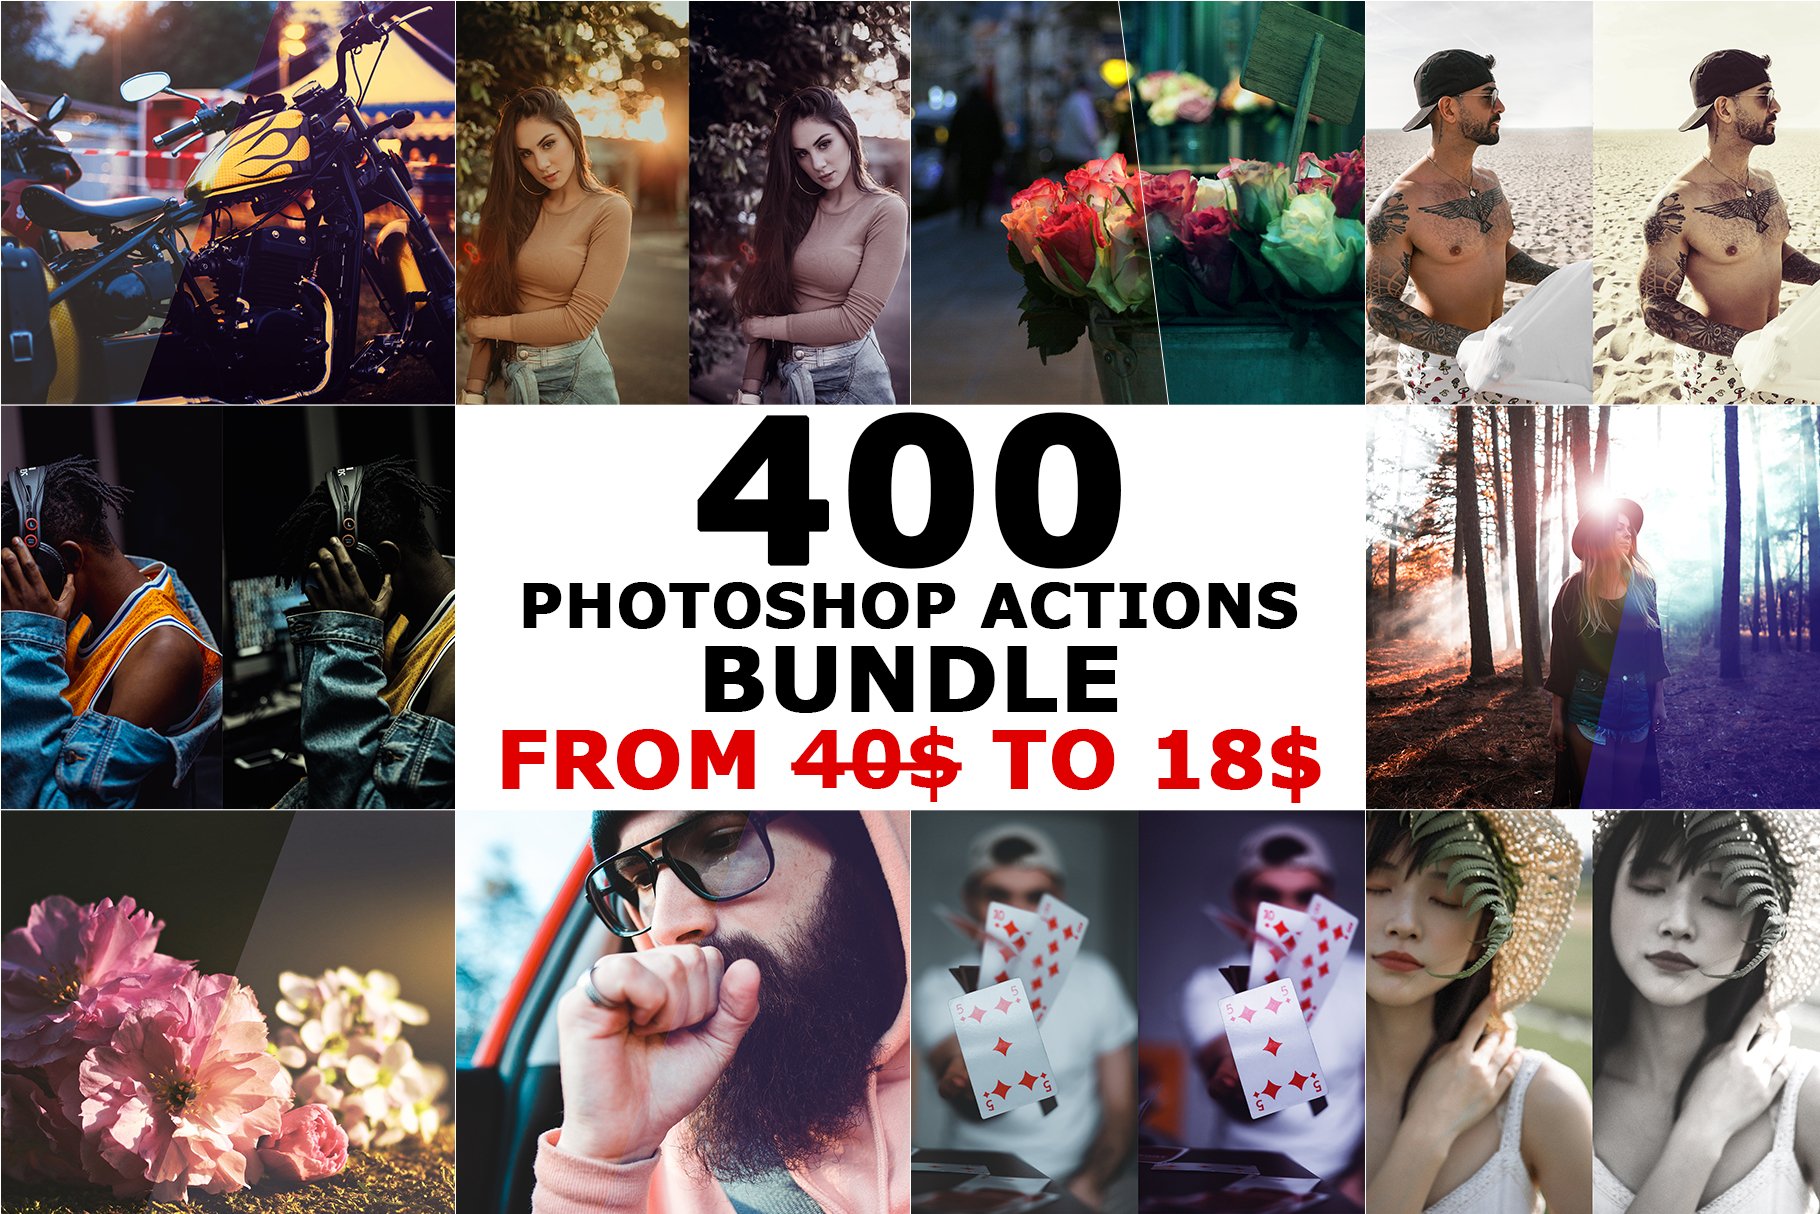 400 Modern Photoshop Actions SALEcover image.